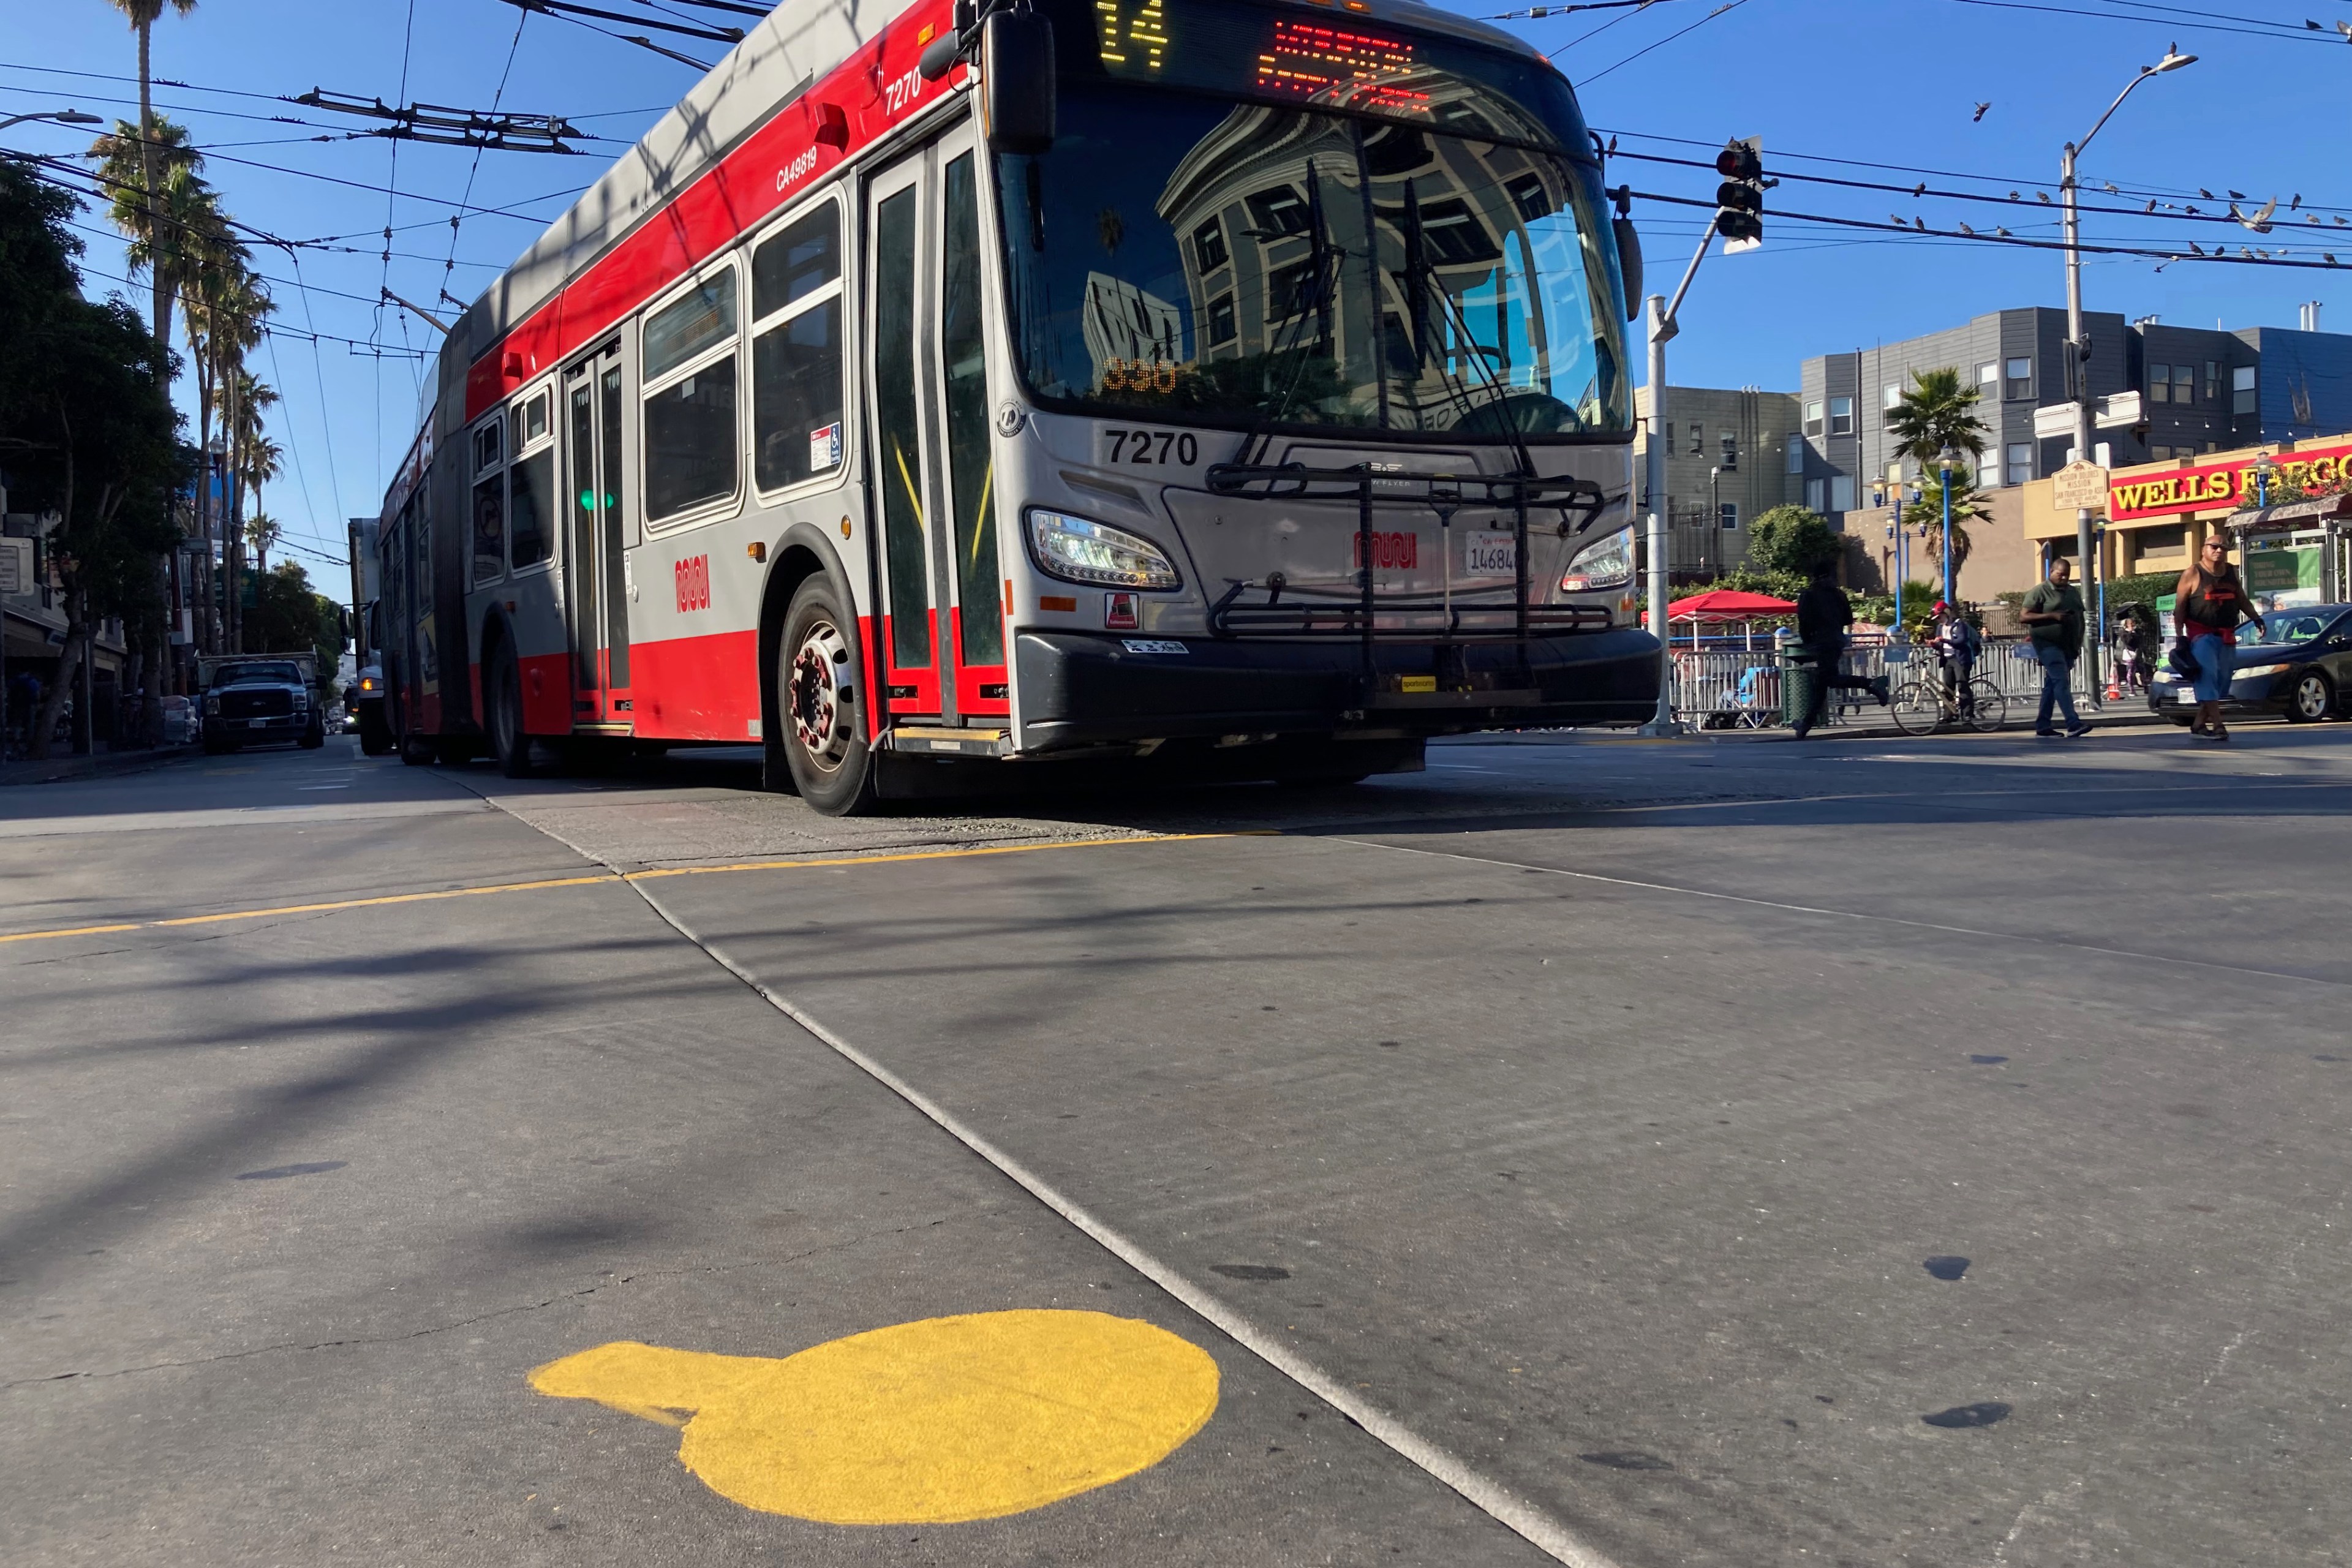 A red and silver articulated bus is turning on a city street with overhead wires, near pedestrians and shops.